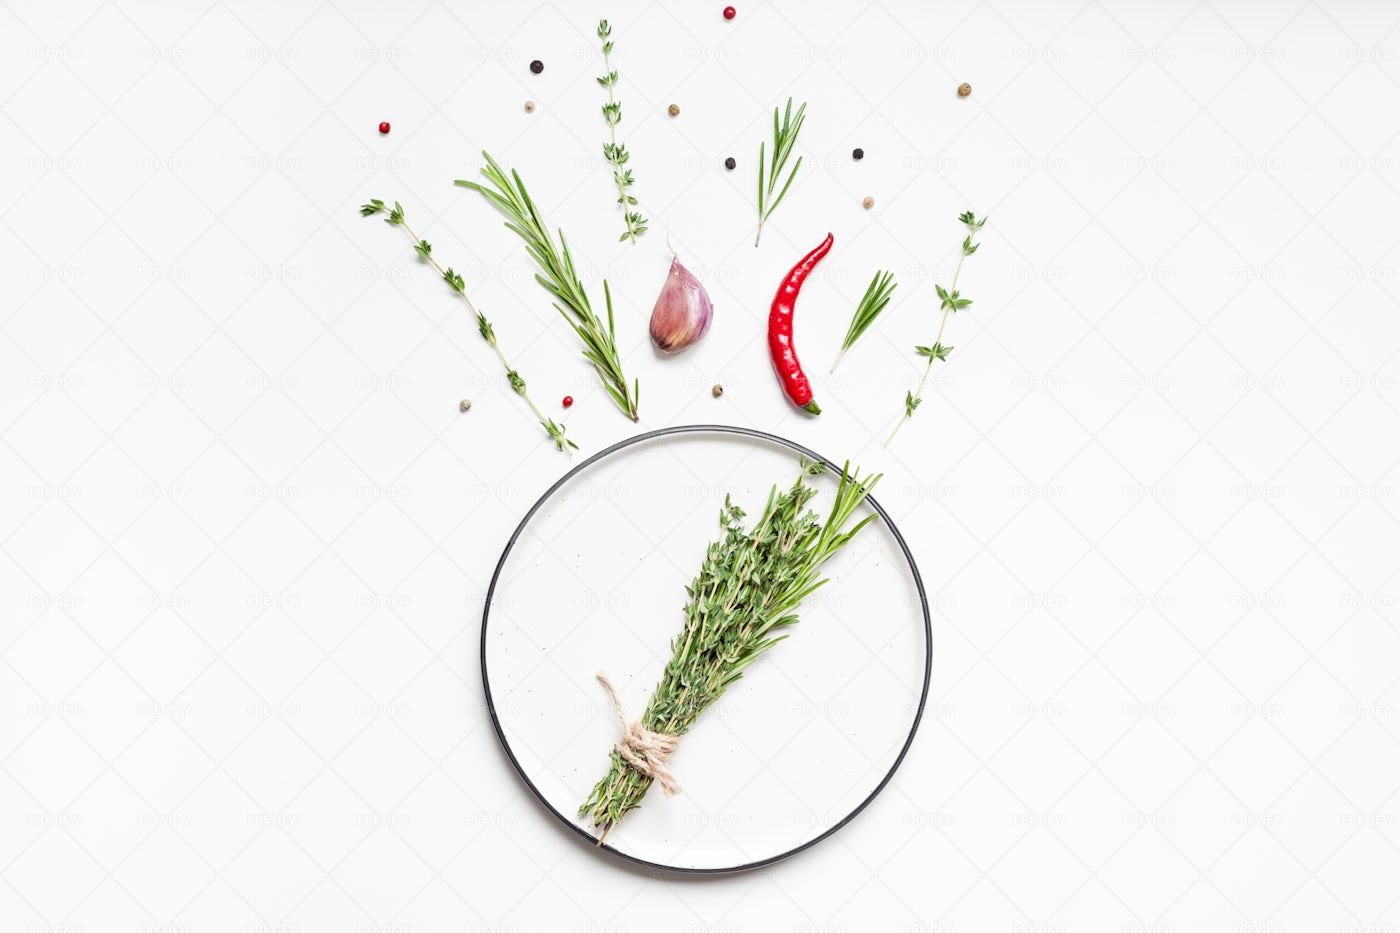 Plate With Herbs And Spices: Stock Photos